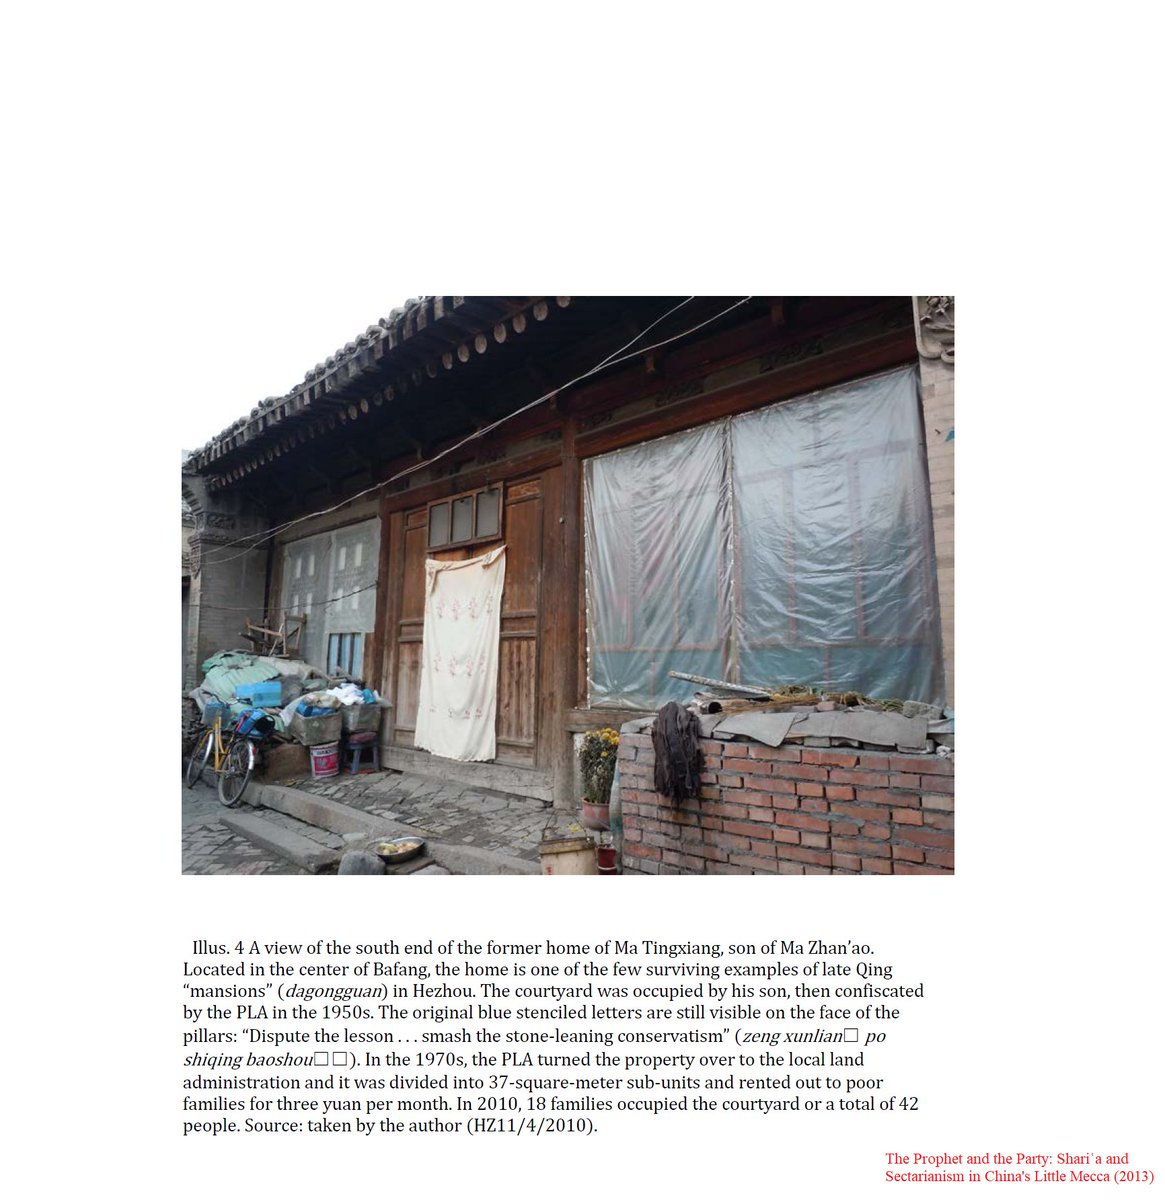 The house of Ma Tingxiang in Linxia's Bafang, Gansu Province. The CCP seized it from his son in the 1950s.

(11/4/2010)